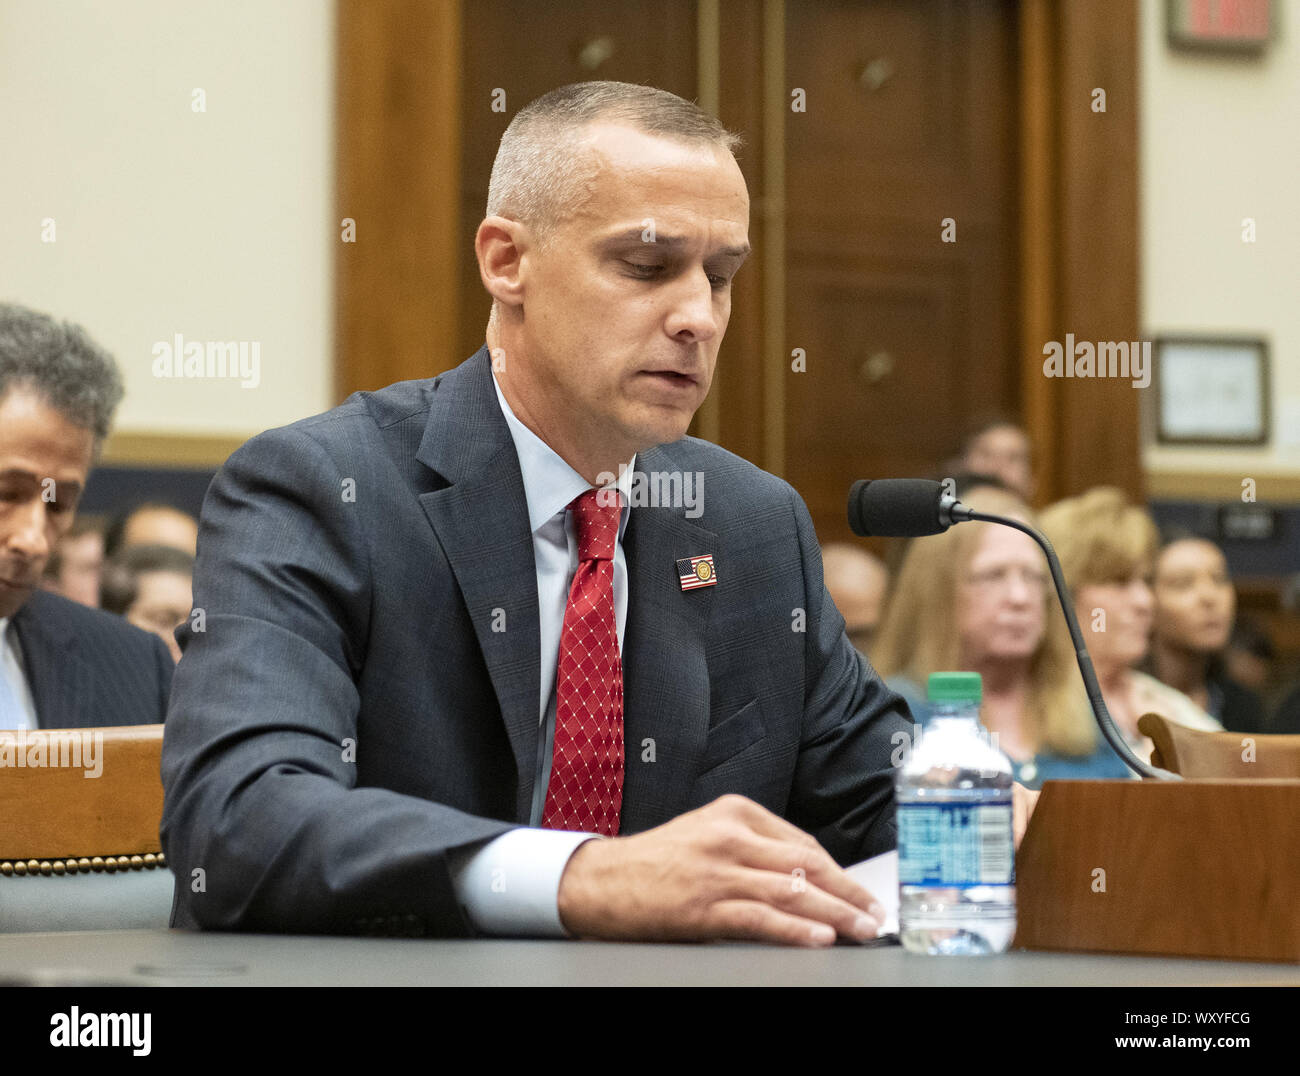 Washington, District of Columbia, USA. 17th Sep, 2019. Former Trump campaign manager Corey Lewandowski reads his opening statement as he testifies before the United States House Committee on the Judiciary hearing titled ''Presidential Obstruction of Justice and Abuse of Power'' on Capitol Hill in Washington, DC on Tuesday, September 17, 2019. Credit: Ron Sachs/CNP.(RESTRICTION: NO New York or New Jersey Newspapers or newspapers within a 75 mile radius of New York City) Credit: Ron Sachs/CNP/ZUMA Wire/Alamy Live News Stock Photo